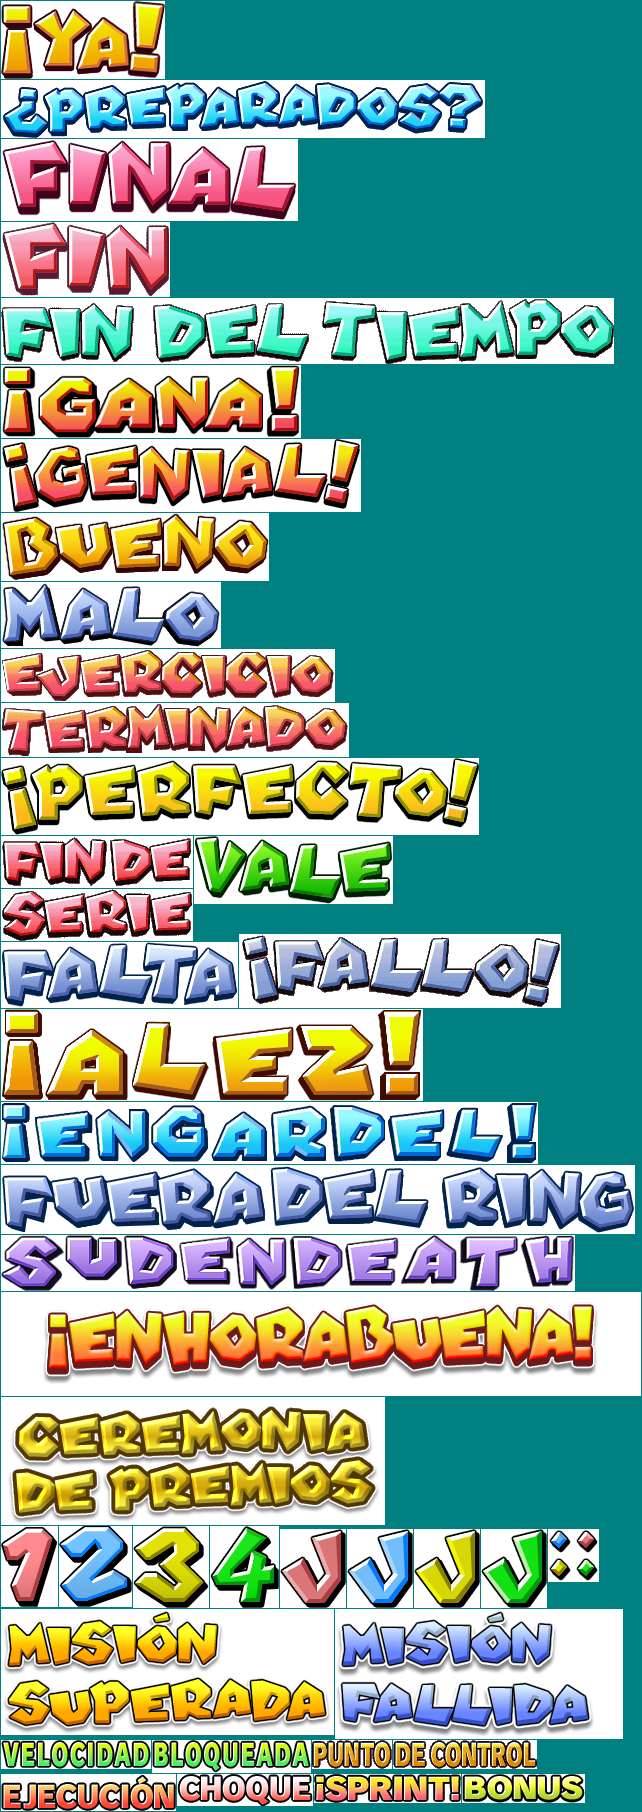 Mario & Sonic at the Olympic Games - Text (Spanish)